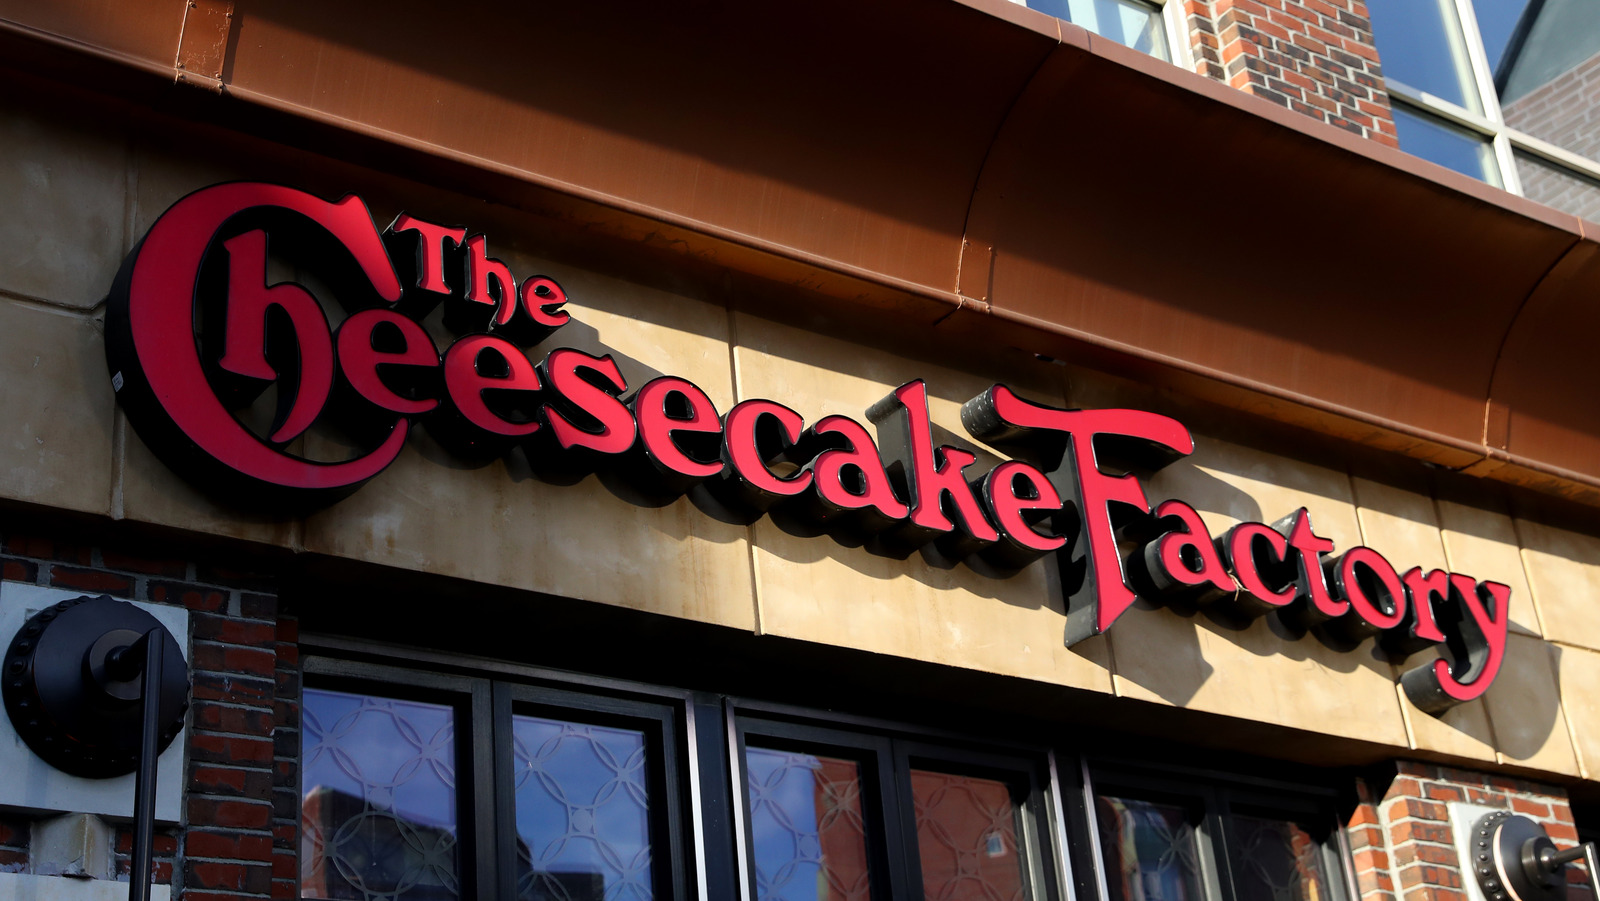 The Cheesecake Factory Just Announced A Rewards Program. Here's What